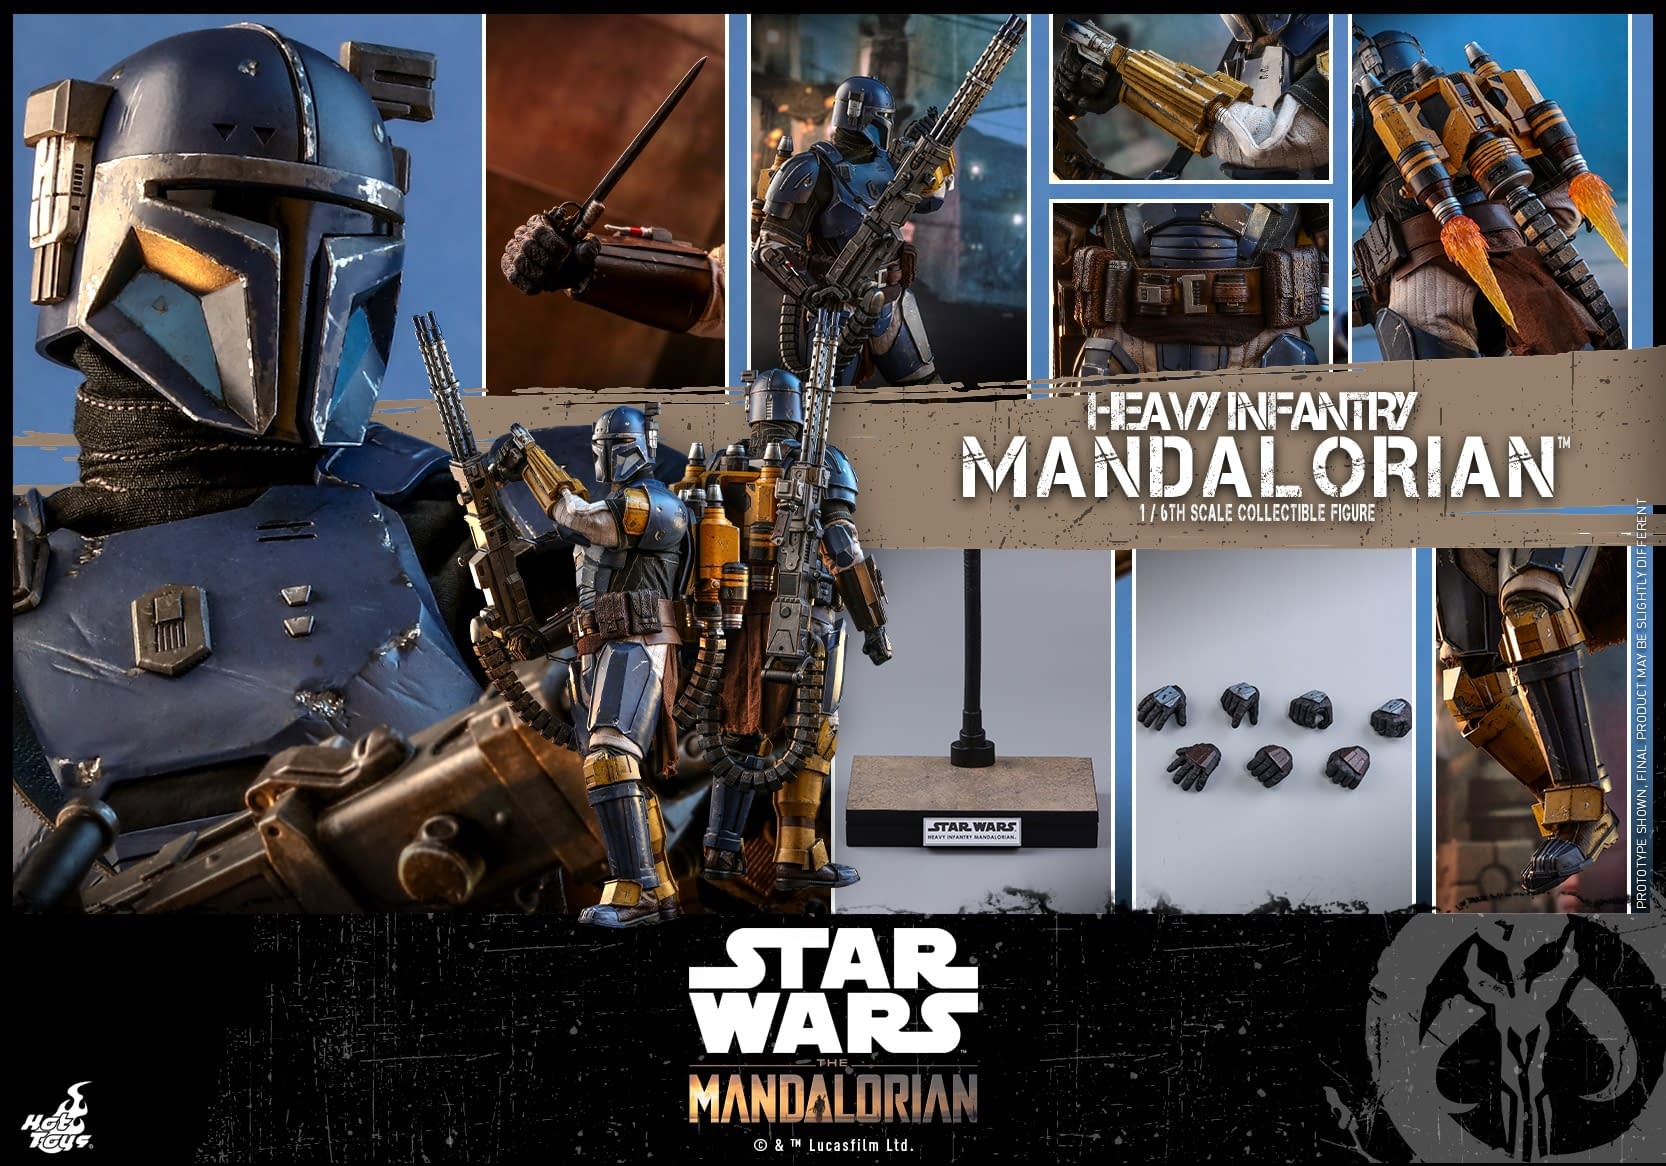 The Mandalorian Gets Heavy with New Hot Toys Figure